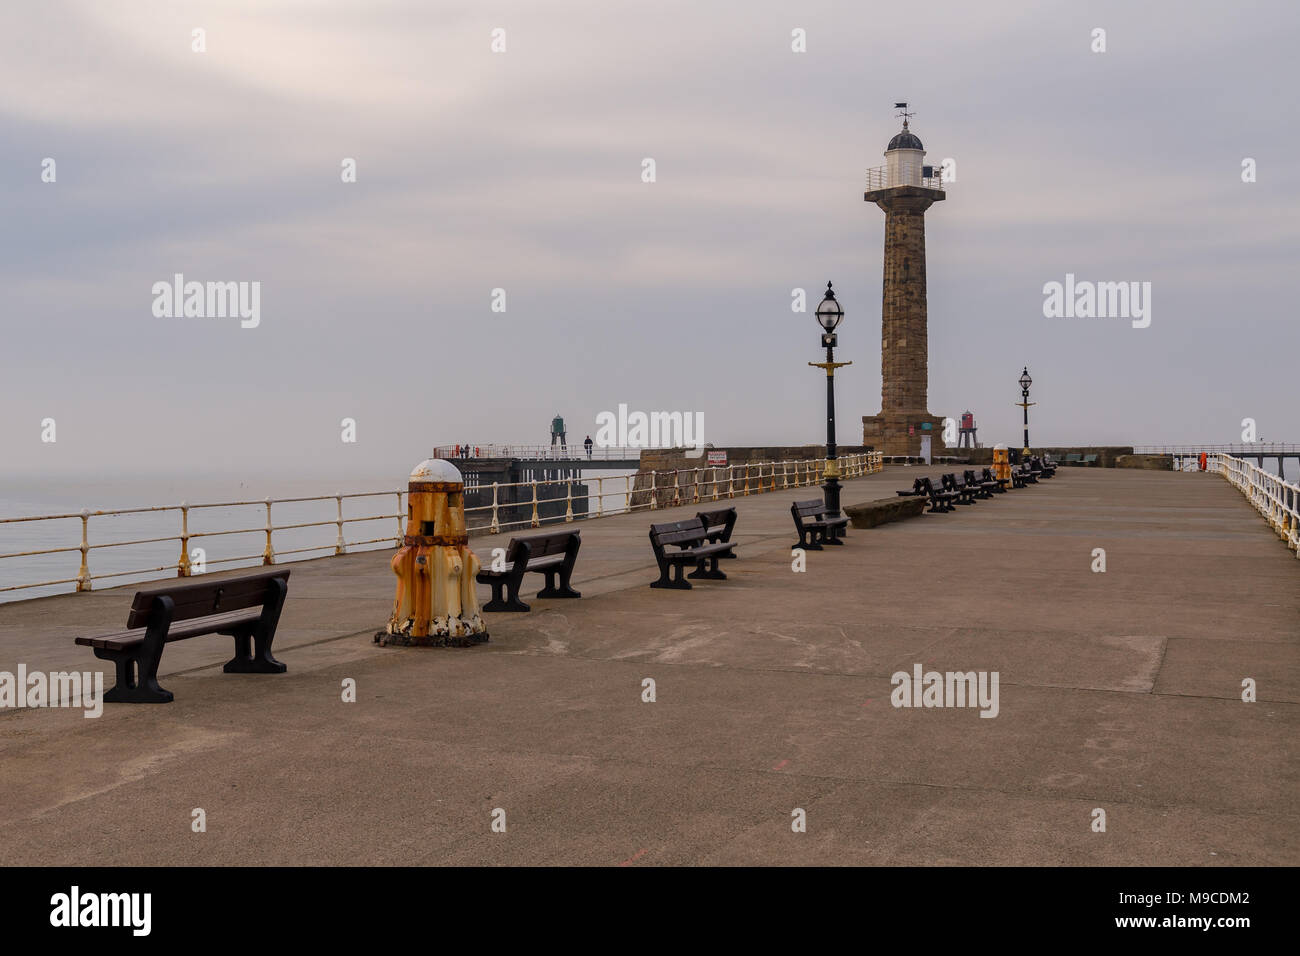 Whitby, North Yorkshire, England, UK - May 06, 2016: Evening clouds at the West Pier of Whitby harbour Stock Photo